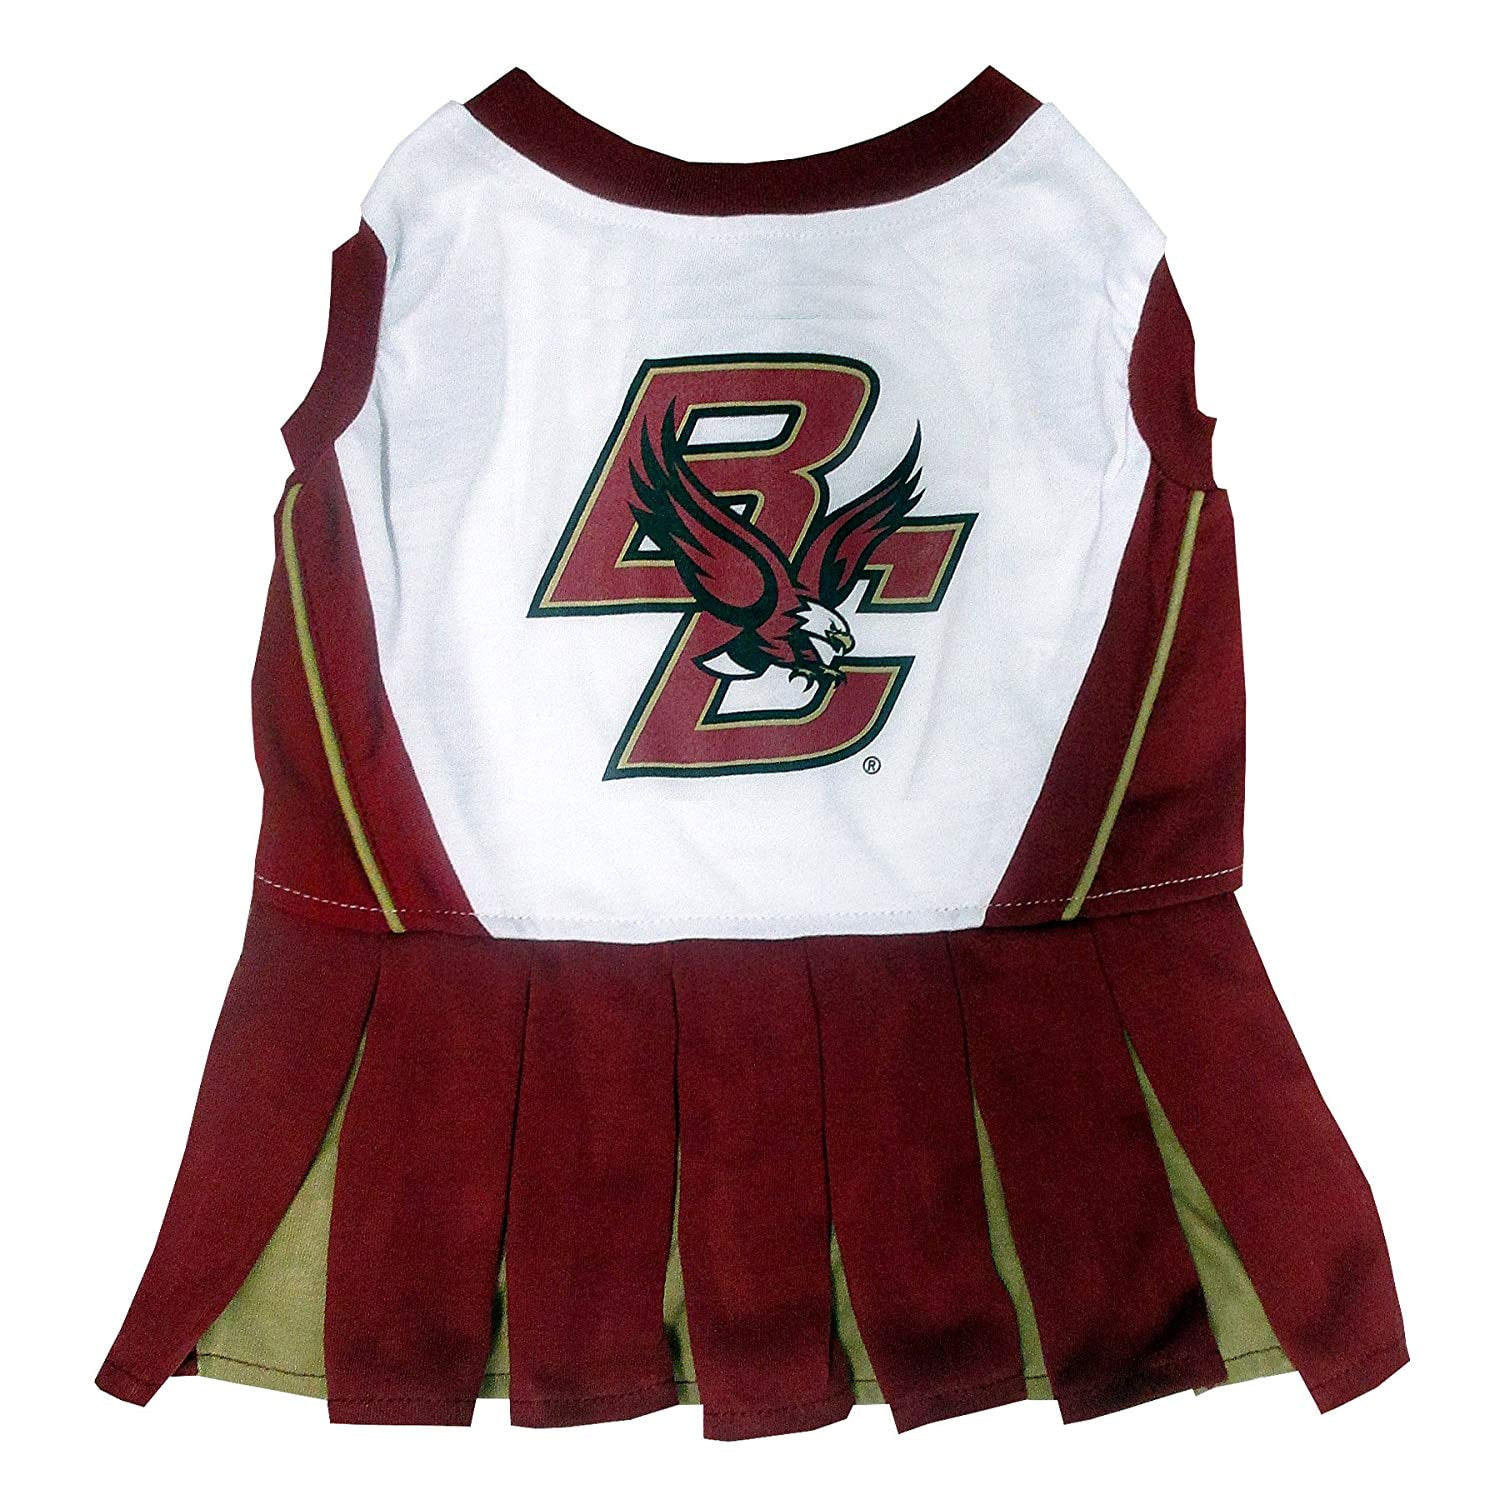 NCAA BOSTON COLLEGE EAGLES DOG Cheerleader Outfit, Medium, Are you getting ...